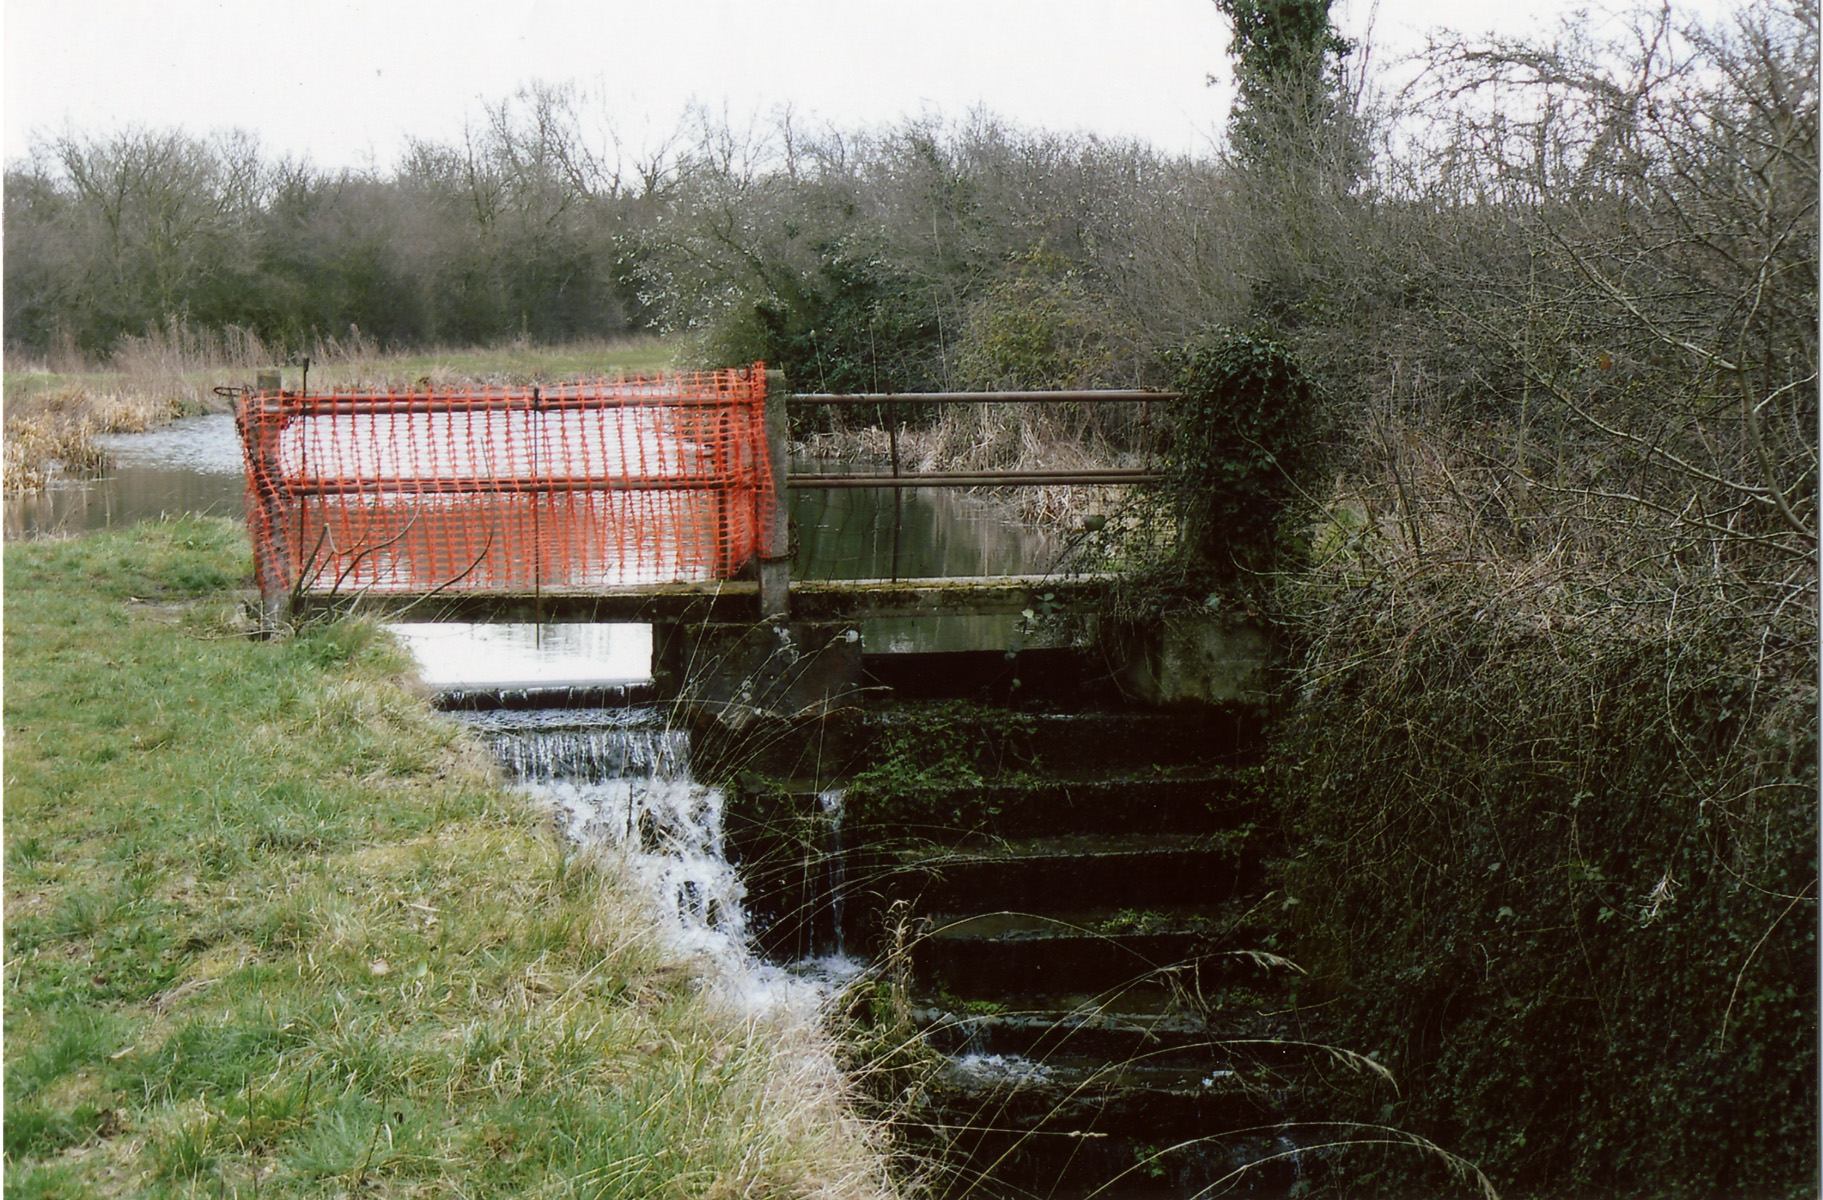 The lock gate giving access to the old lock house 2